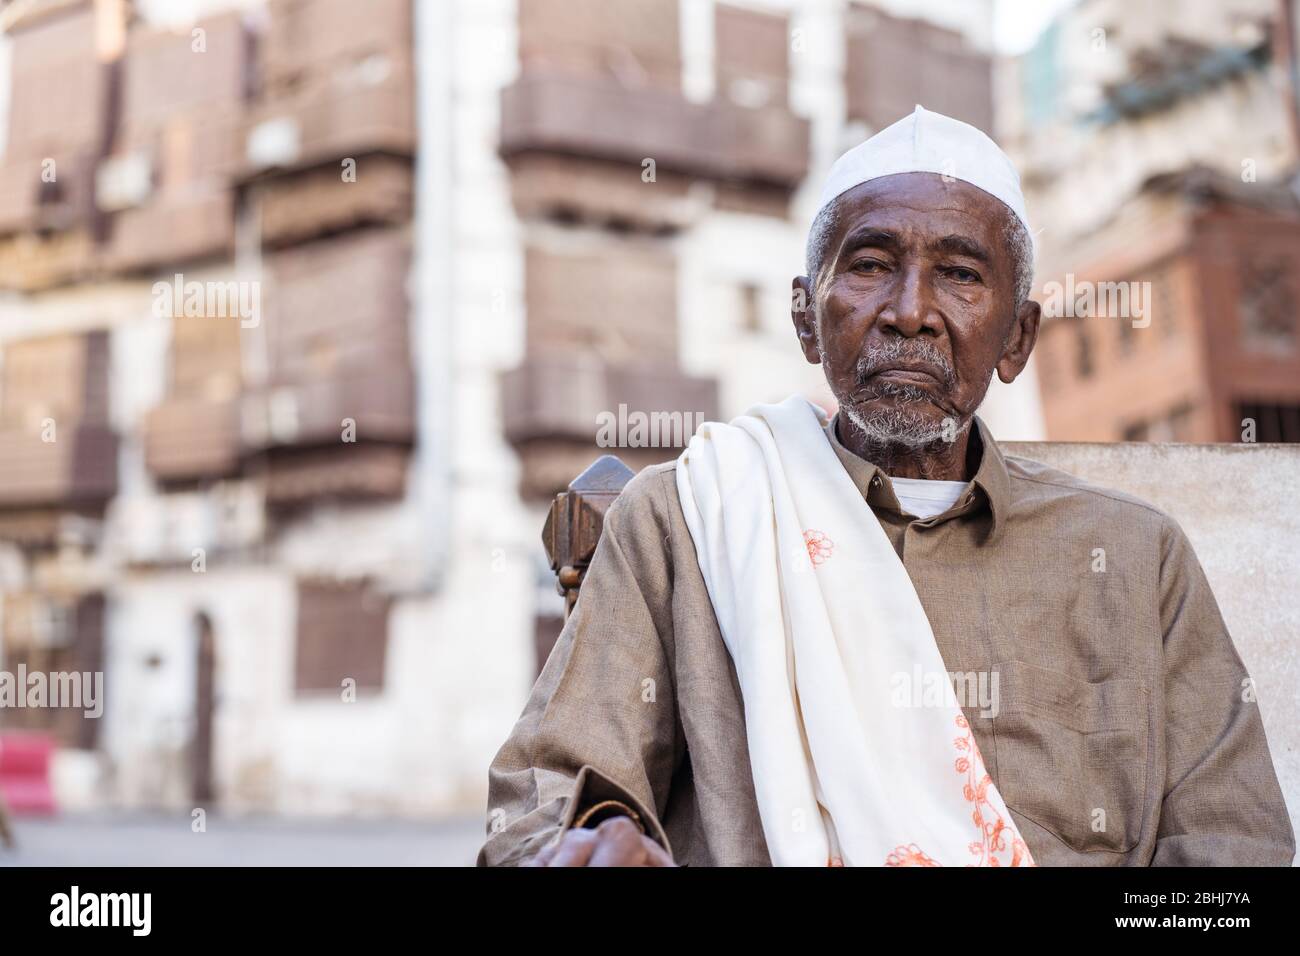 Jeddah / Saudi Arabia - January 16, 2020: portrait of famous traditional carpenter in Al-Balad drinking tea in the streets of downtown Jeddah Stock Photo